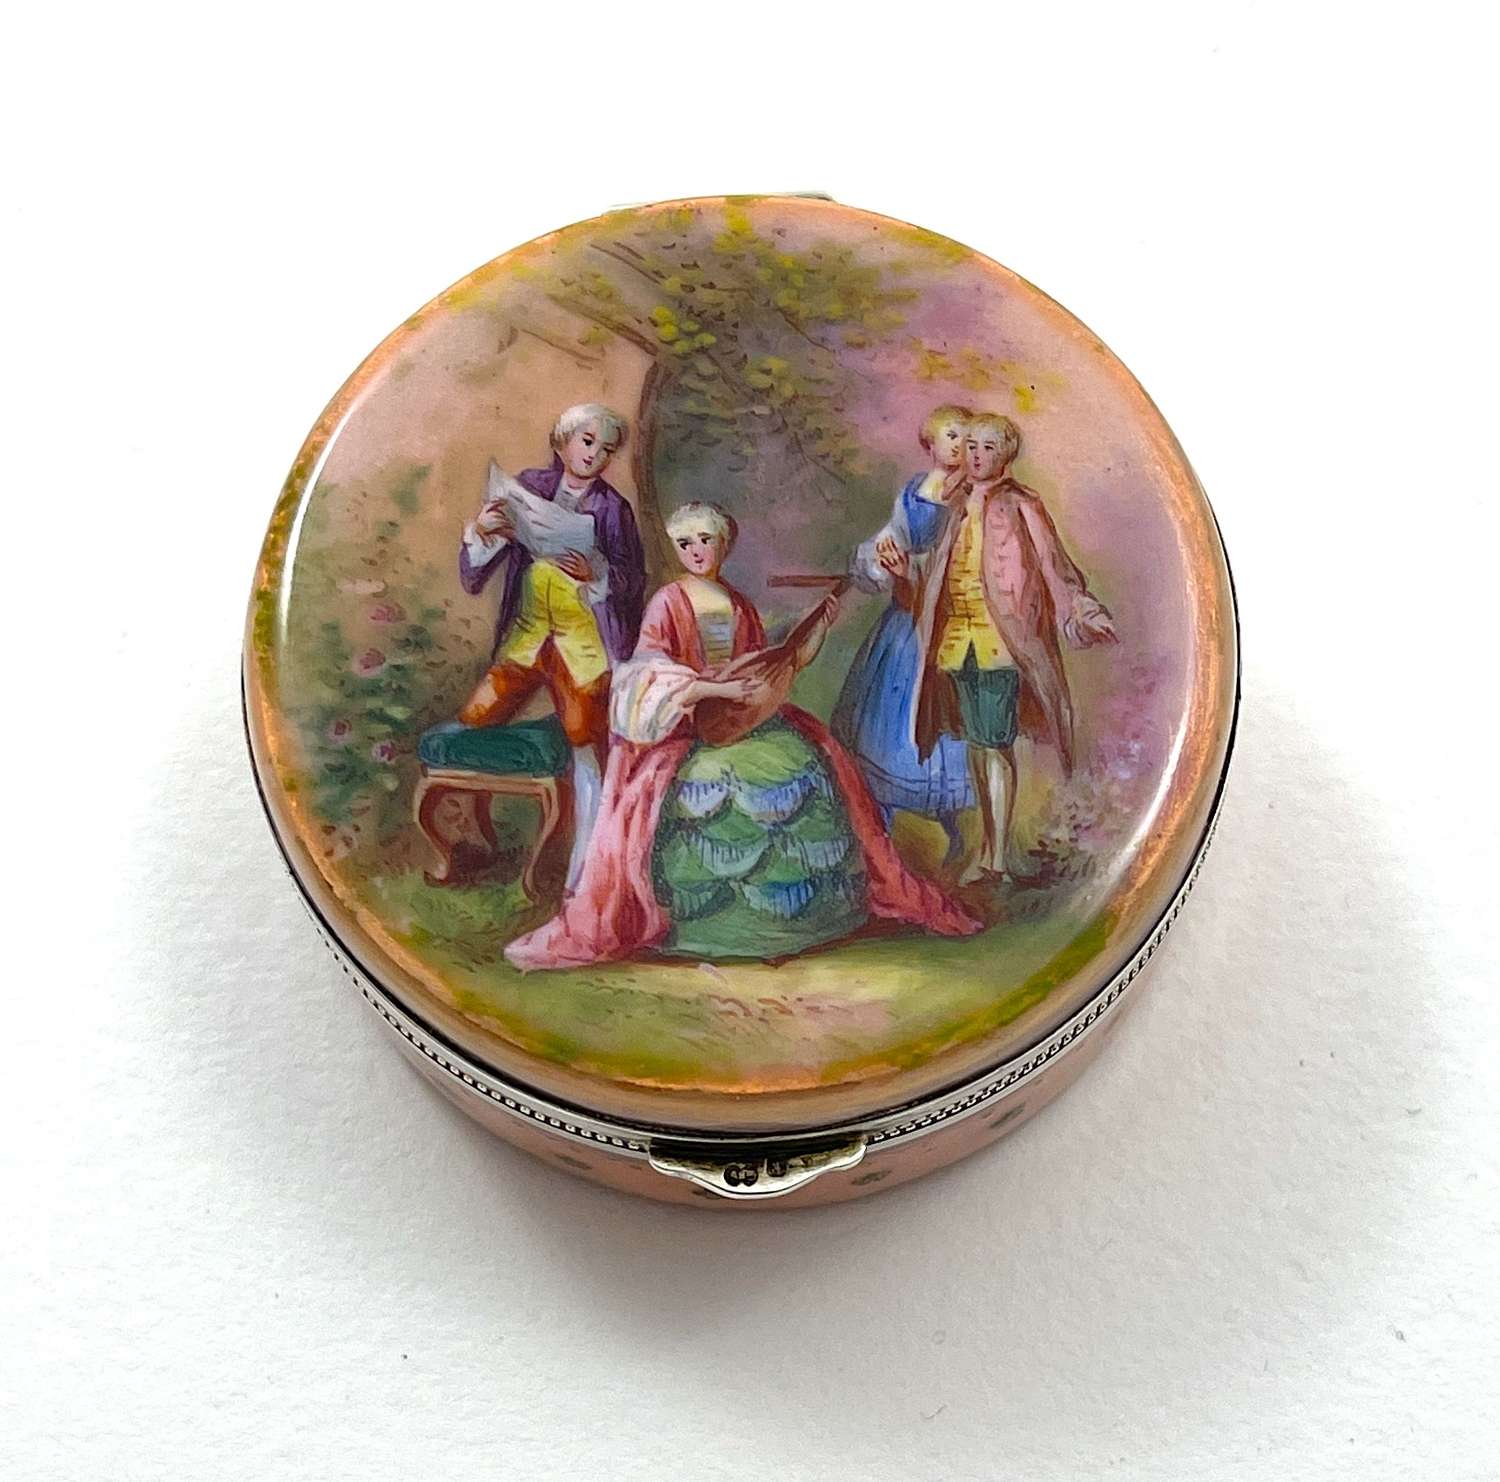 Exquisite Antique Enamel and Silver Pill Box